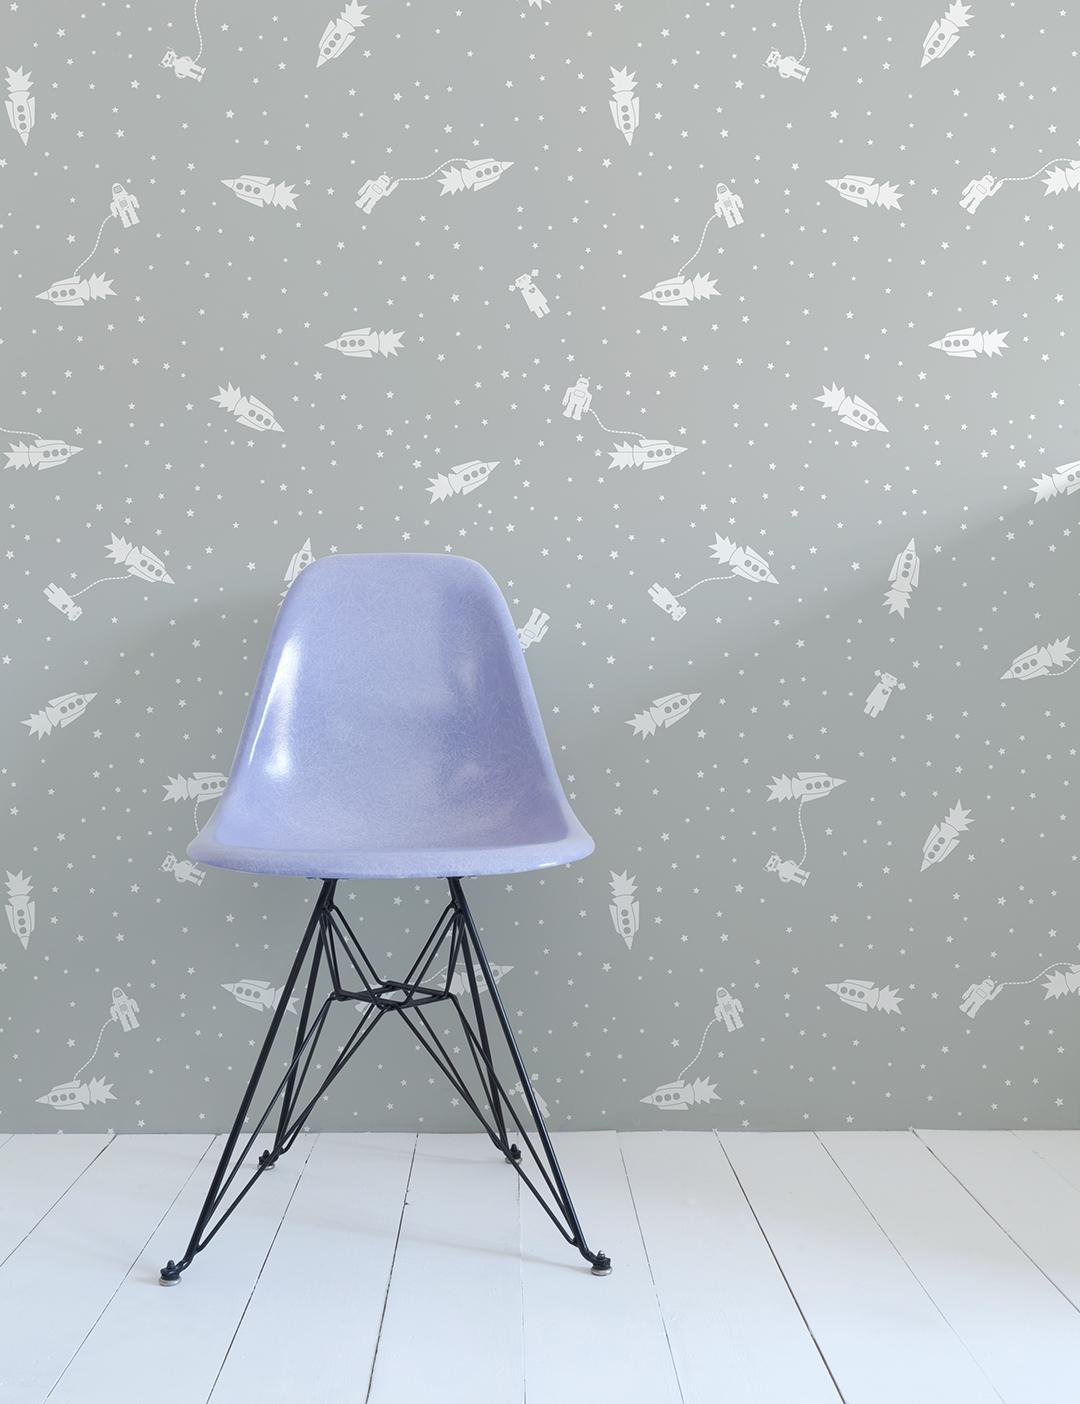 This wall-covering with a galactic scene has Robots in outer space, rocket ships & more... the perfect wallpaper for your child's room.

Samples are available for $18 including US shipping, please message us to purchase.

Printing: Digital pigment